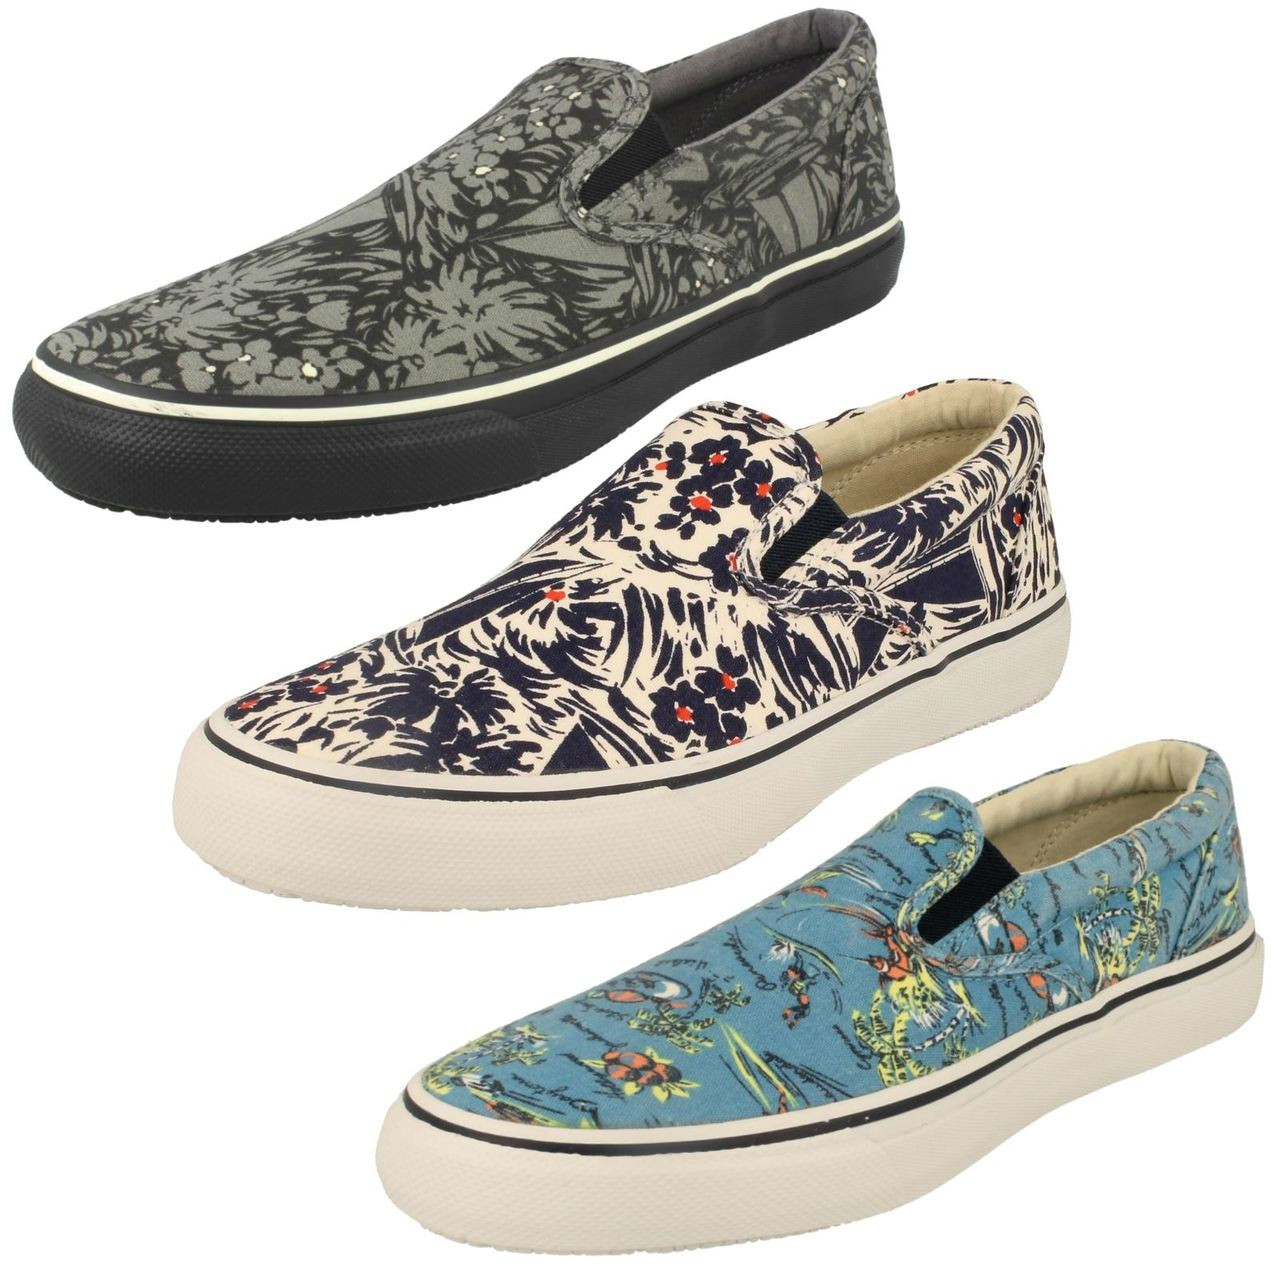 sperry slip on canvas shoes